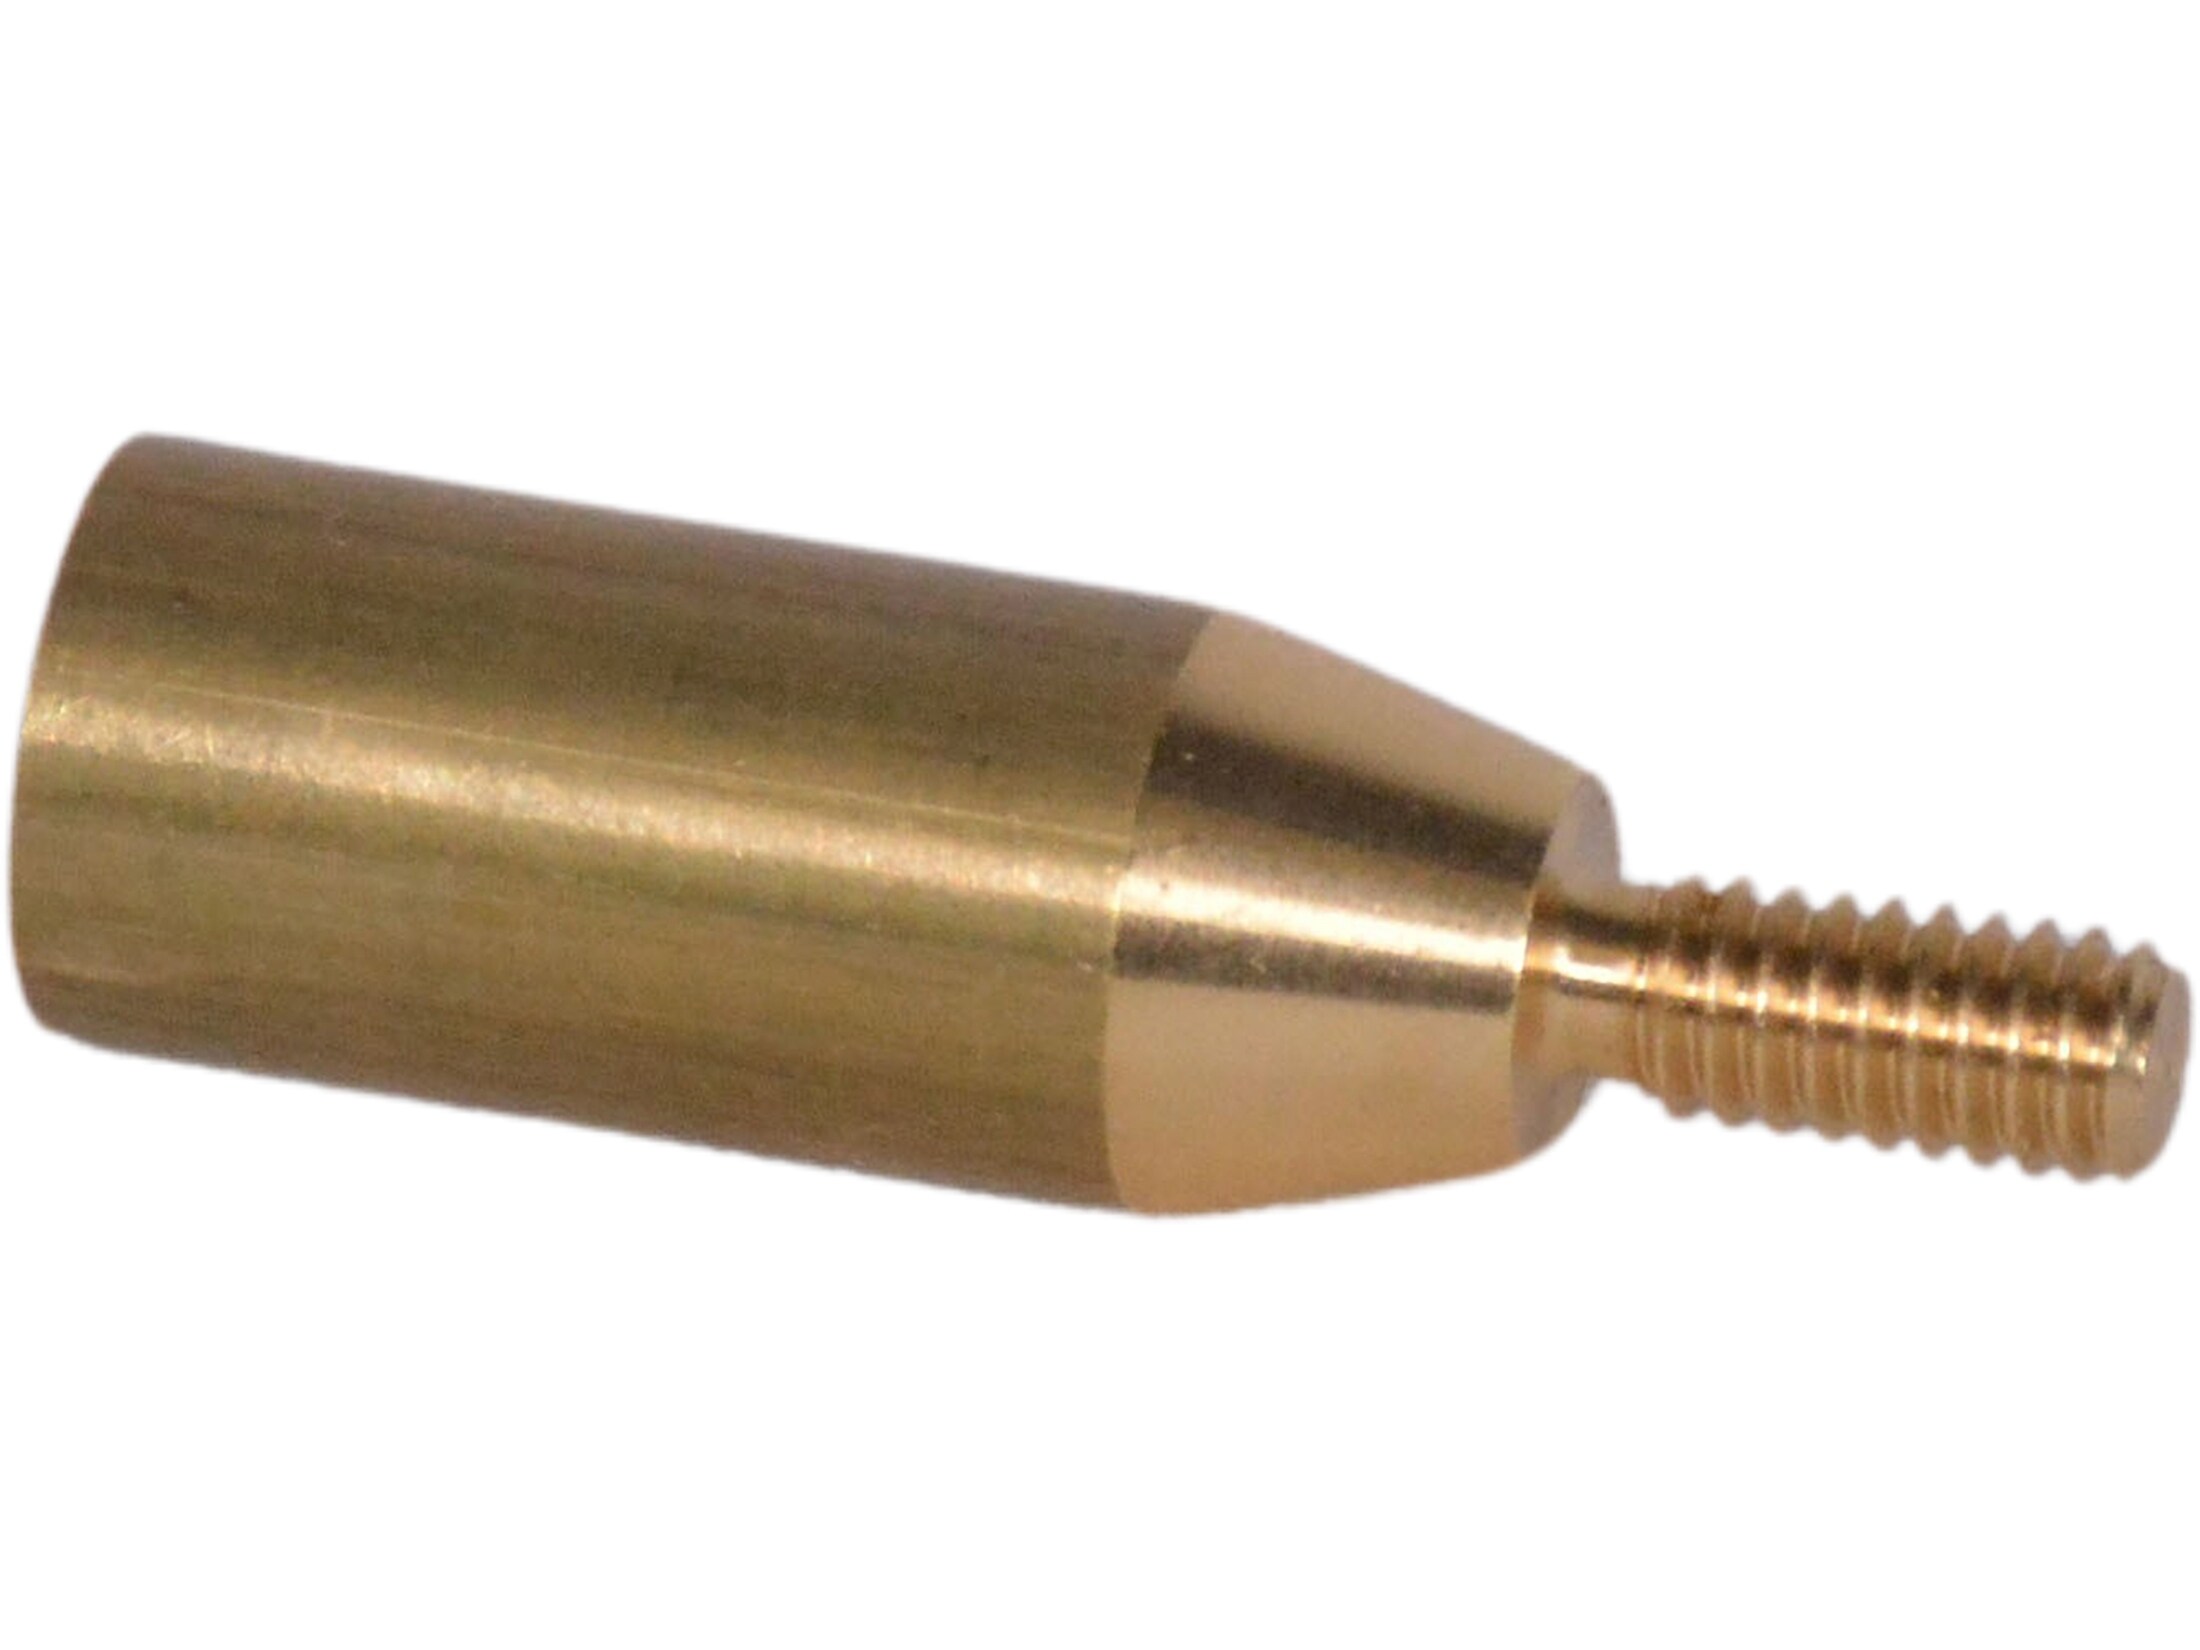 Use military brushes with 8-36 threads on commercial 8-32 rods Thread adapter